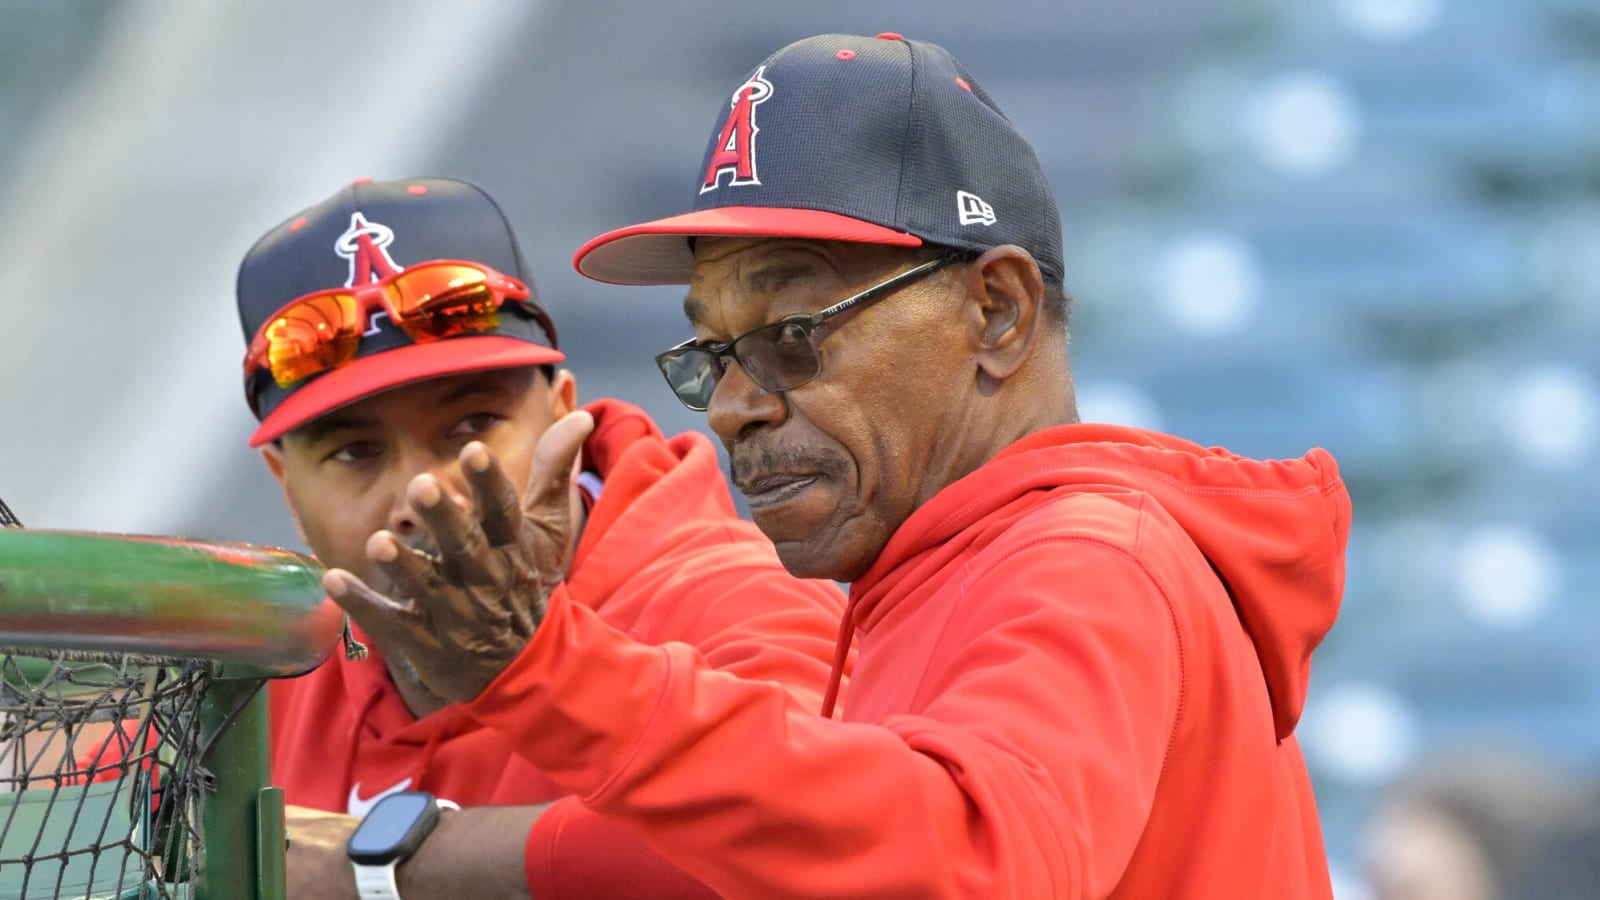  Ron Washington Believes Process Will Work For Mike Trout & Halos